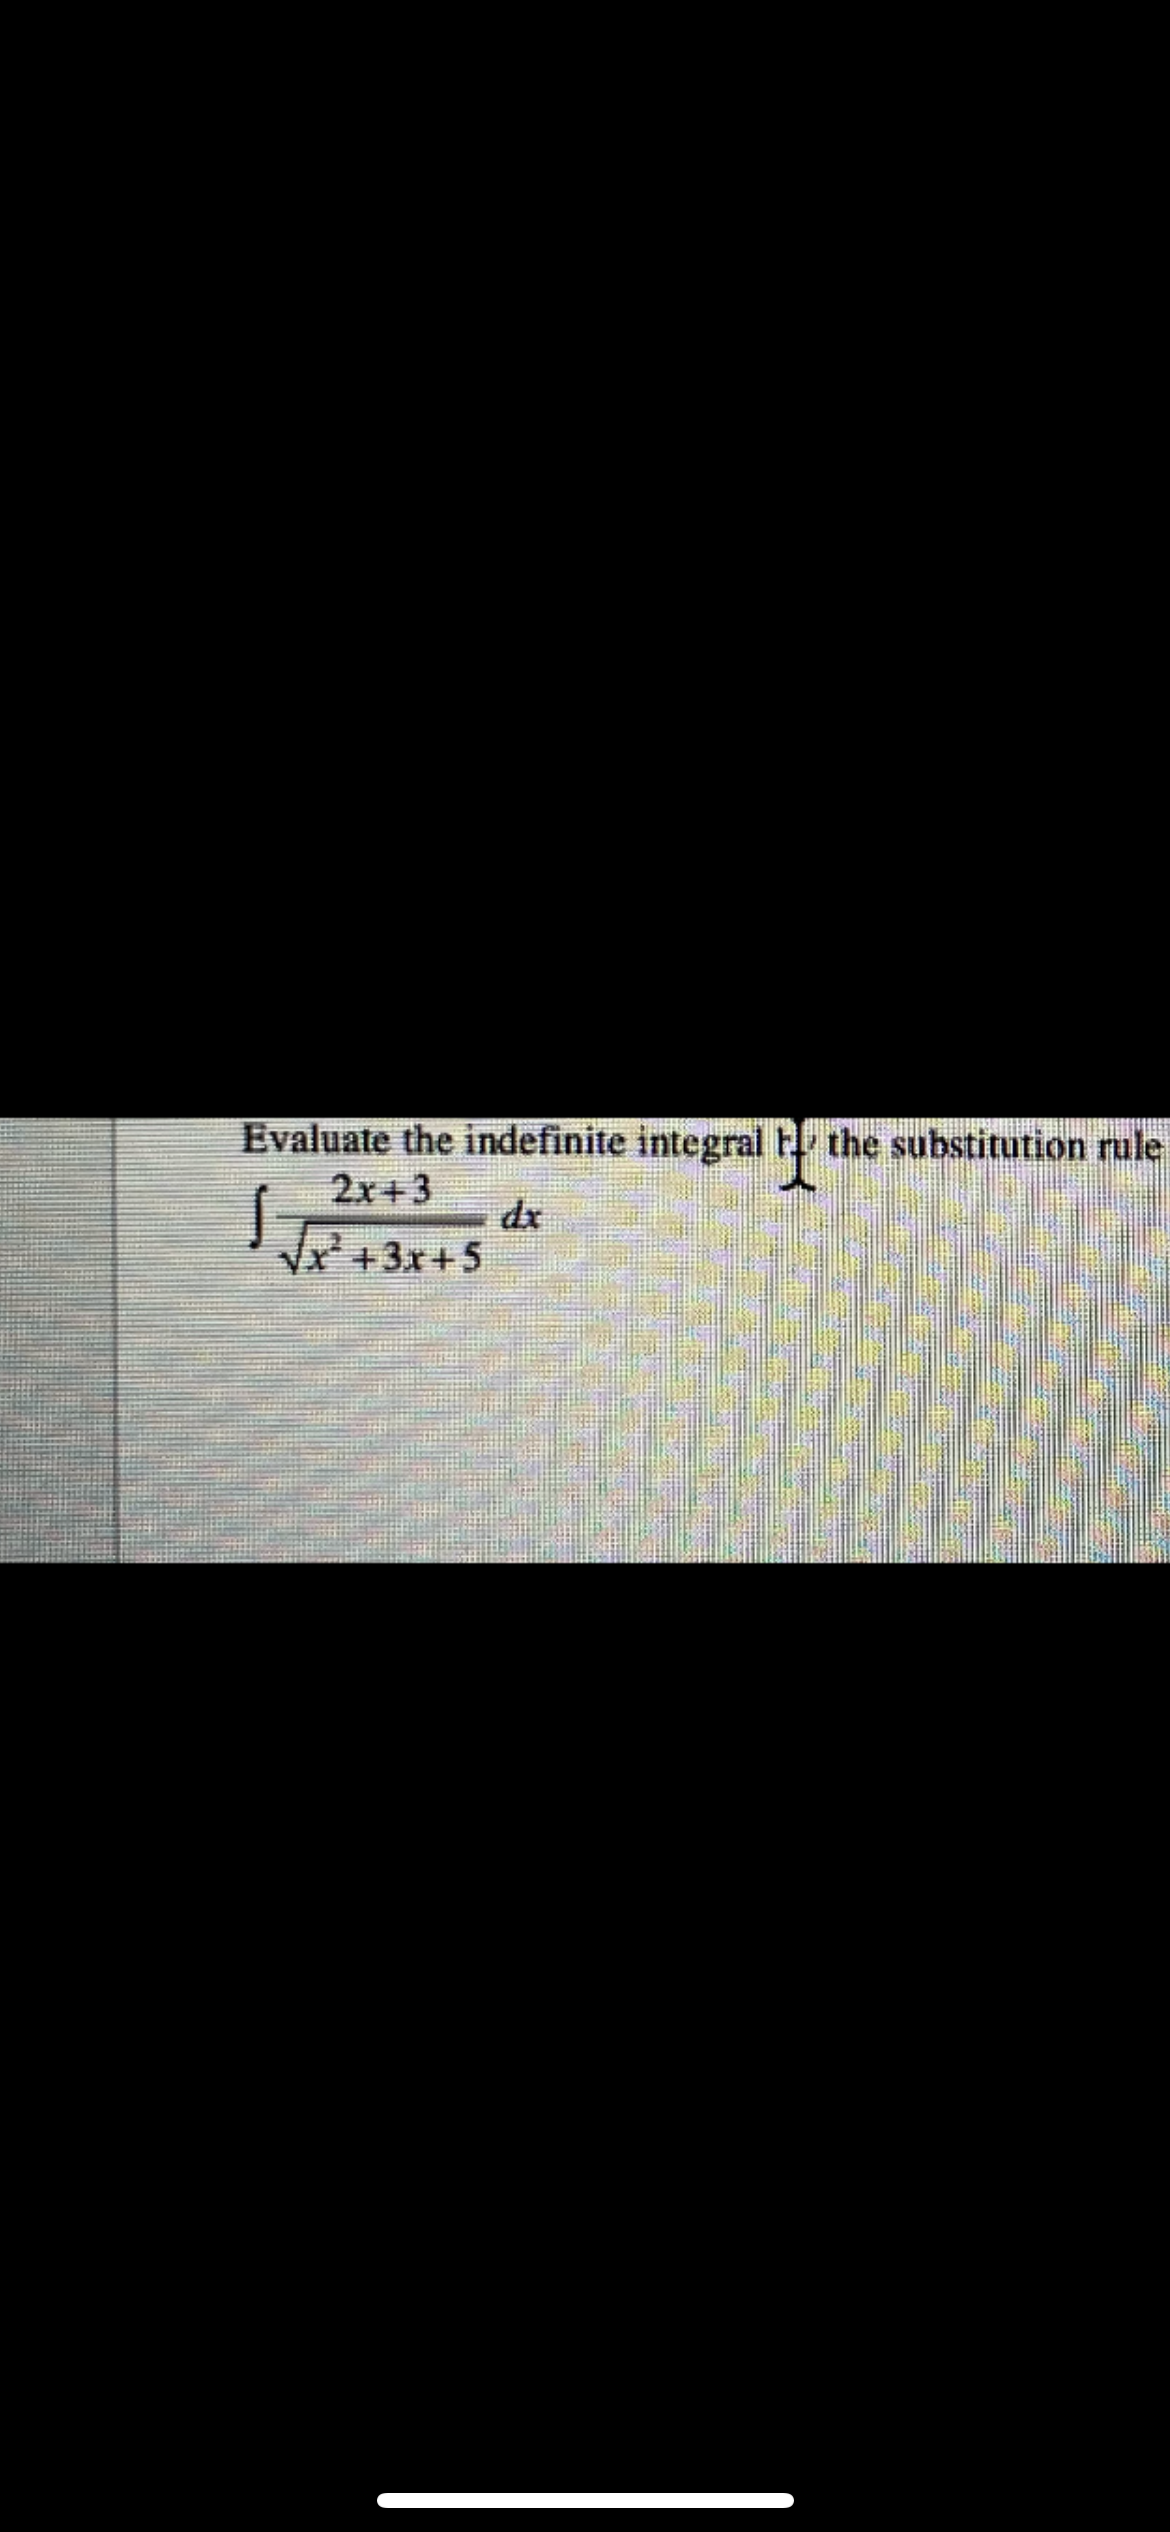 Evaluate the indefinite integral Fl the substitution rule
2x+3
dx
Vx+3x+ 5
